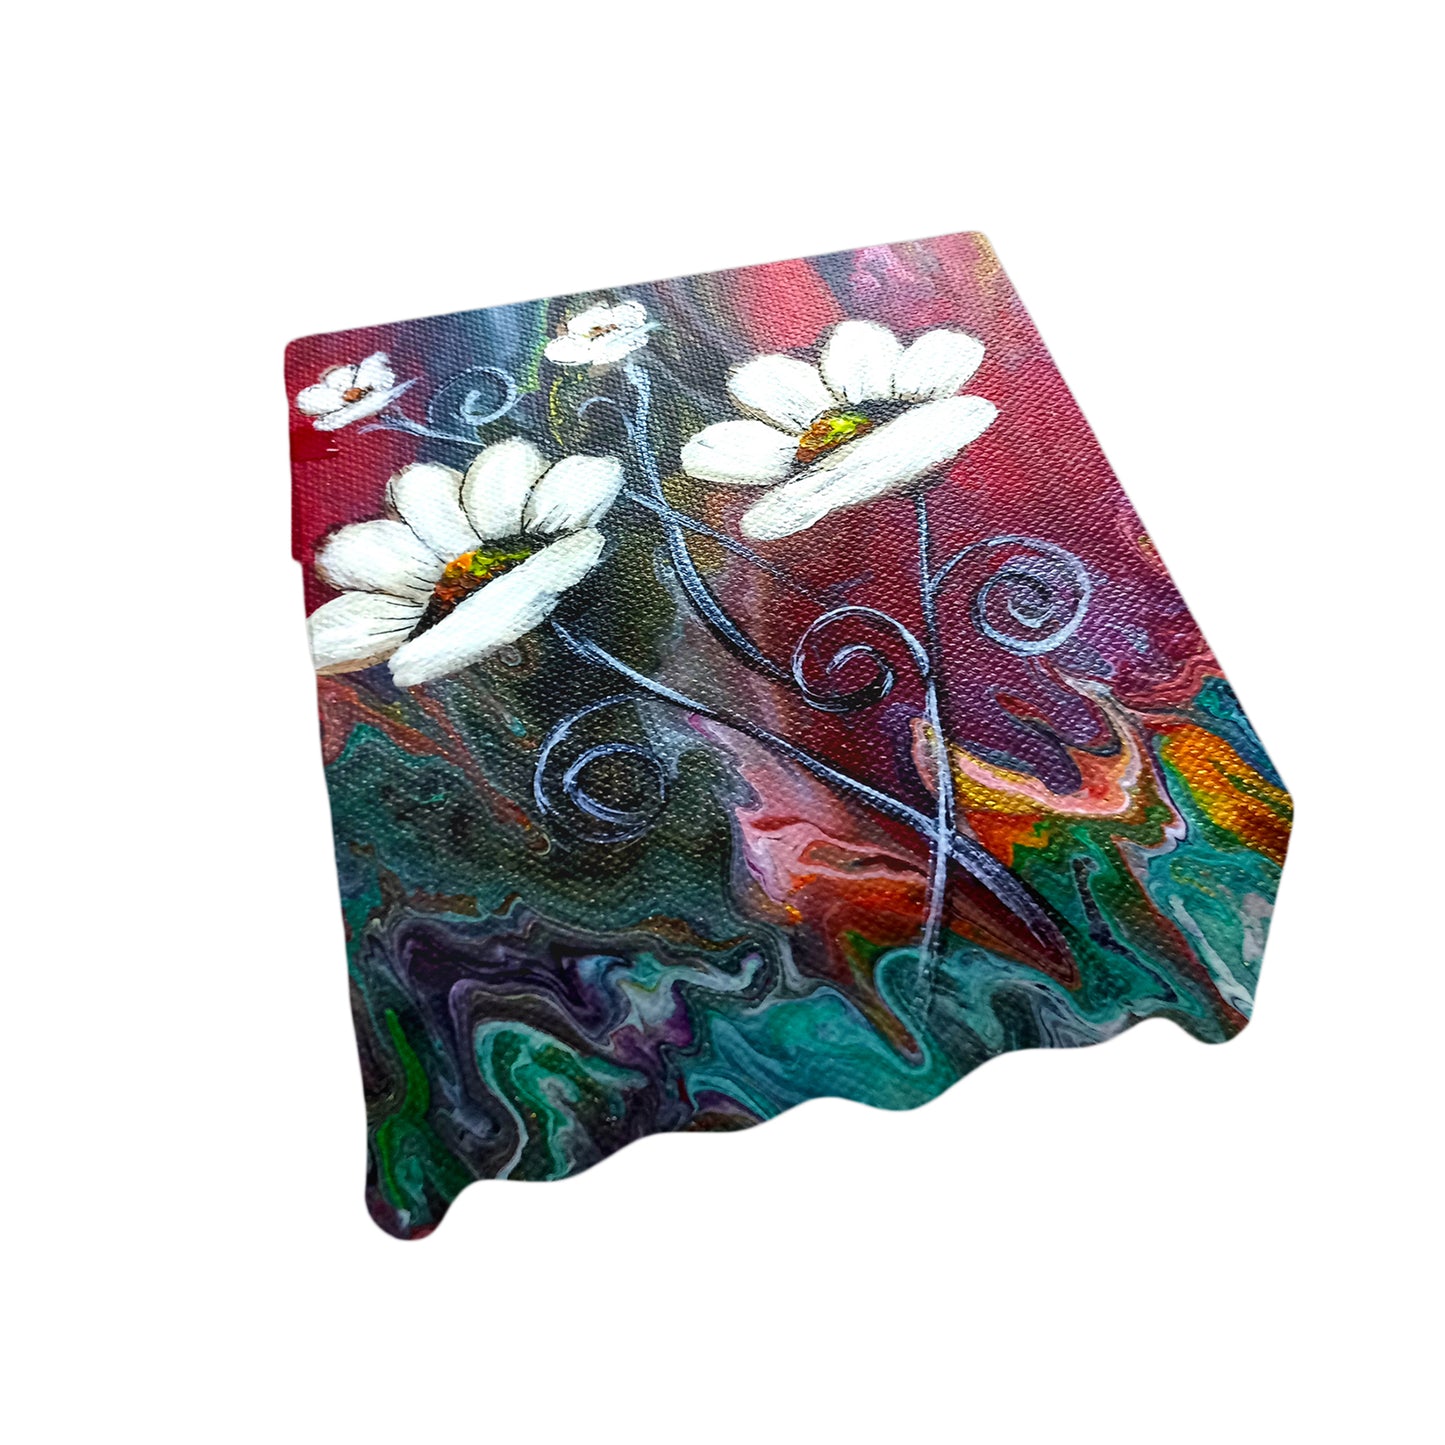 Flowers on Paint Spill Square Tablecloth By Lanies Art